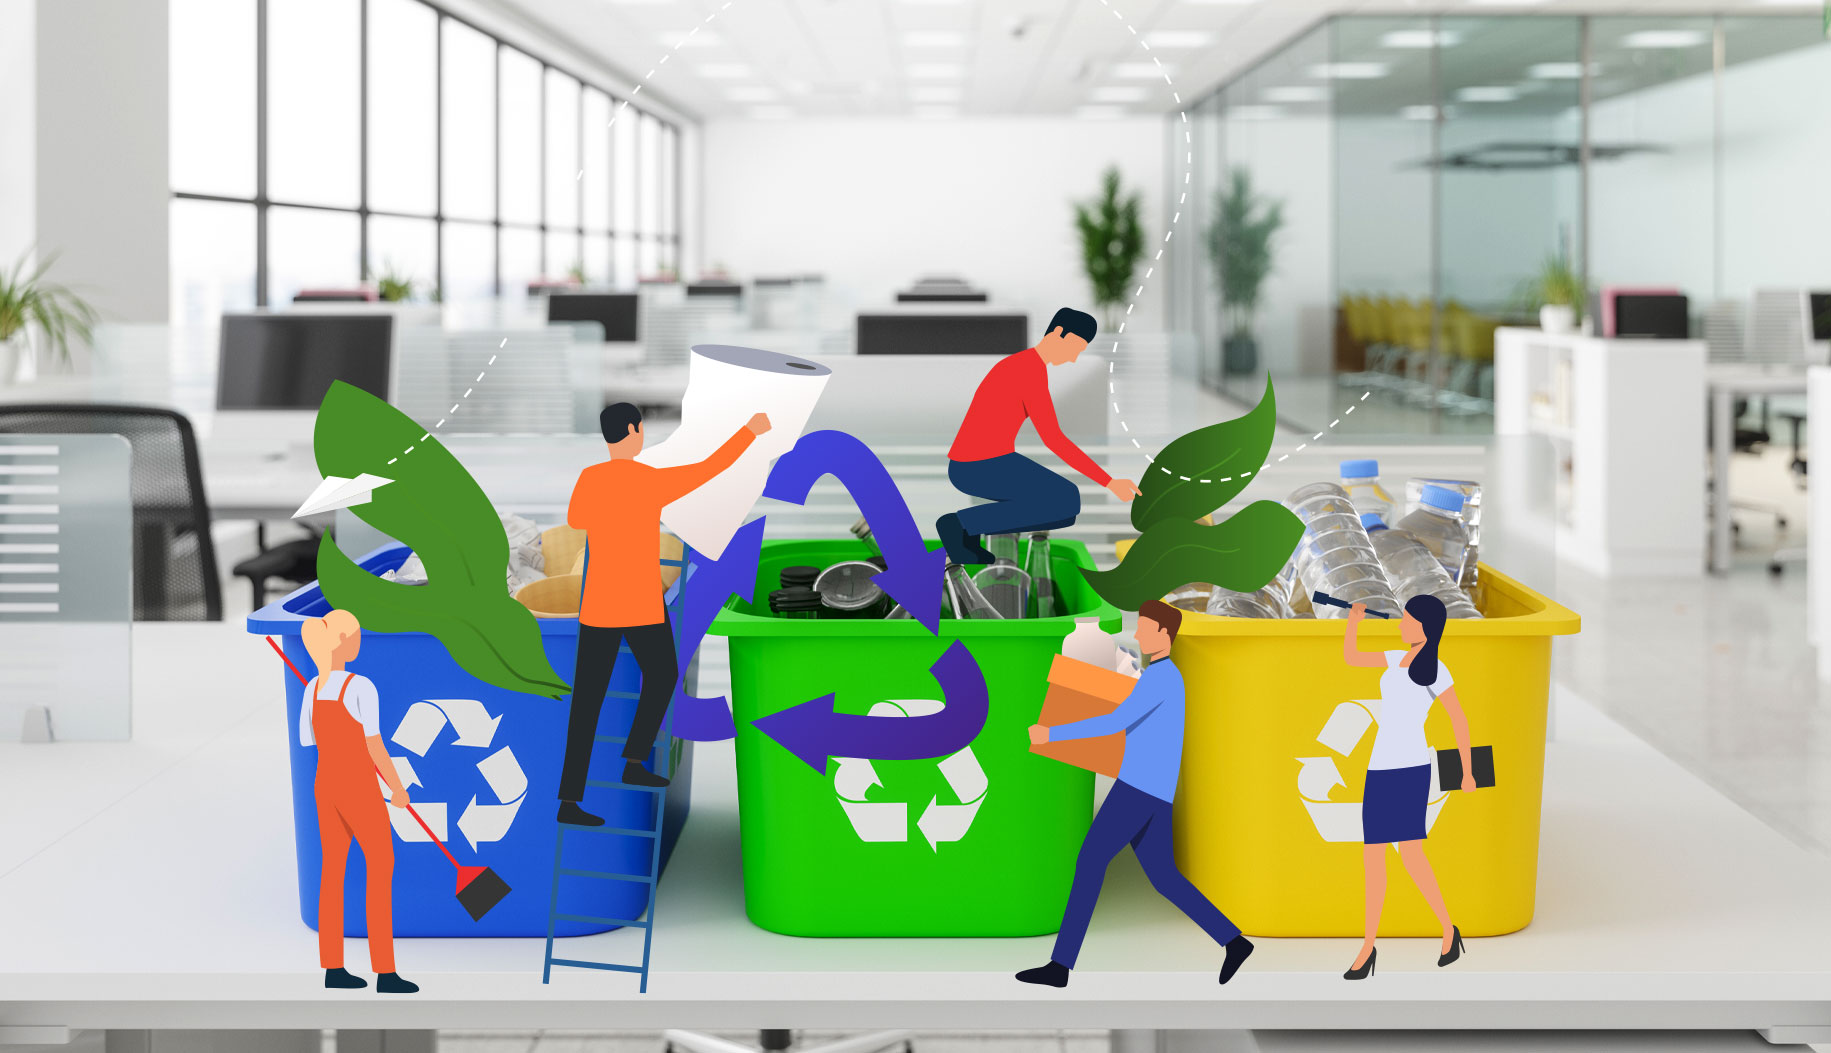 How’s your team managing when it comes to sorting and recycling in the office?